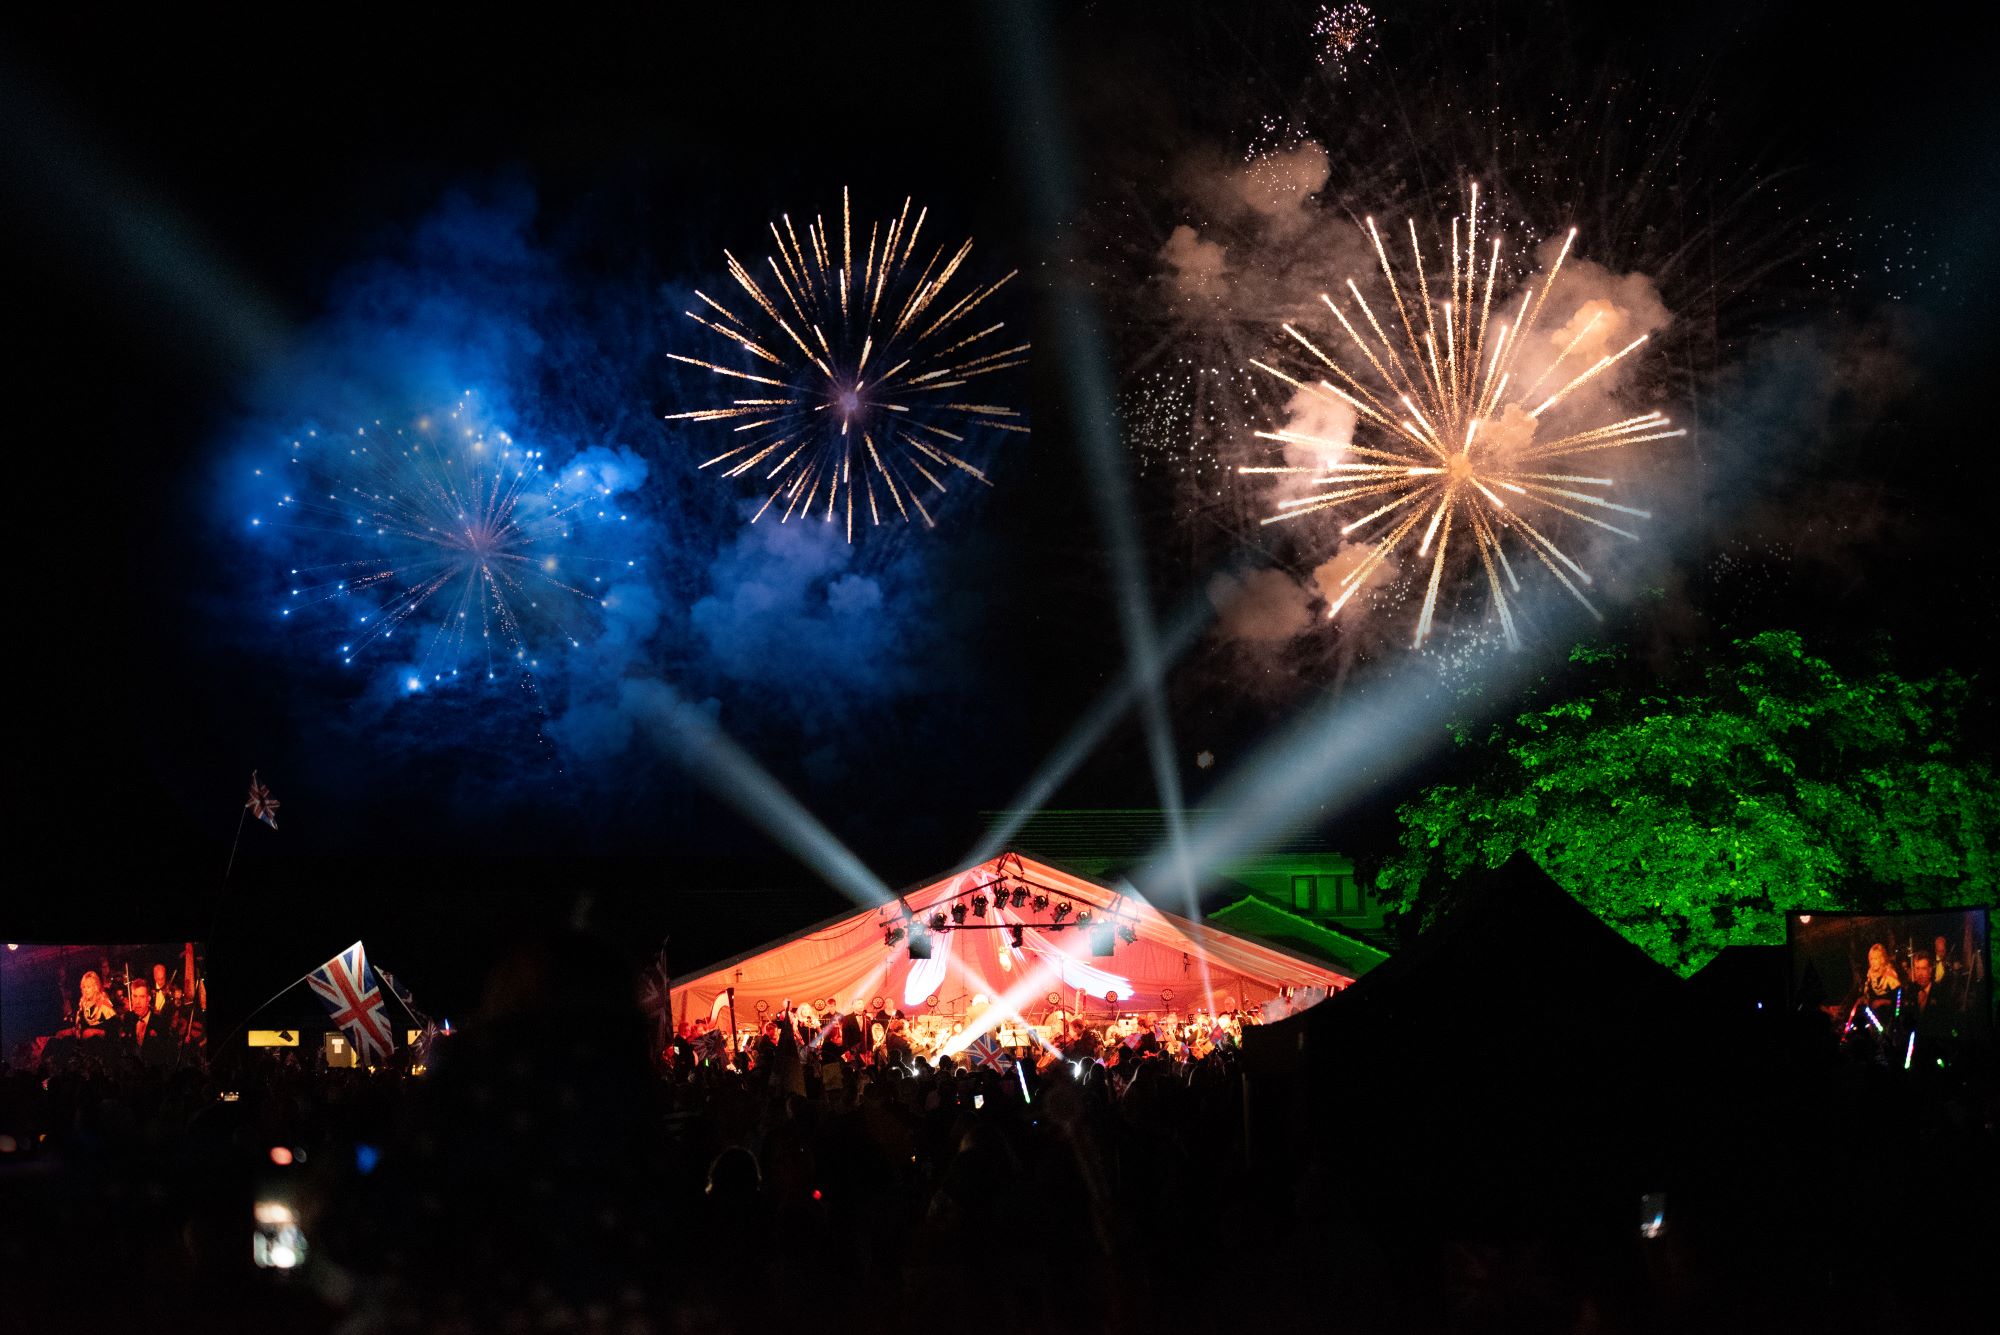 Lichfield Proms in Beacon Park ended with a spectacular fireworks display.